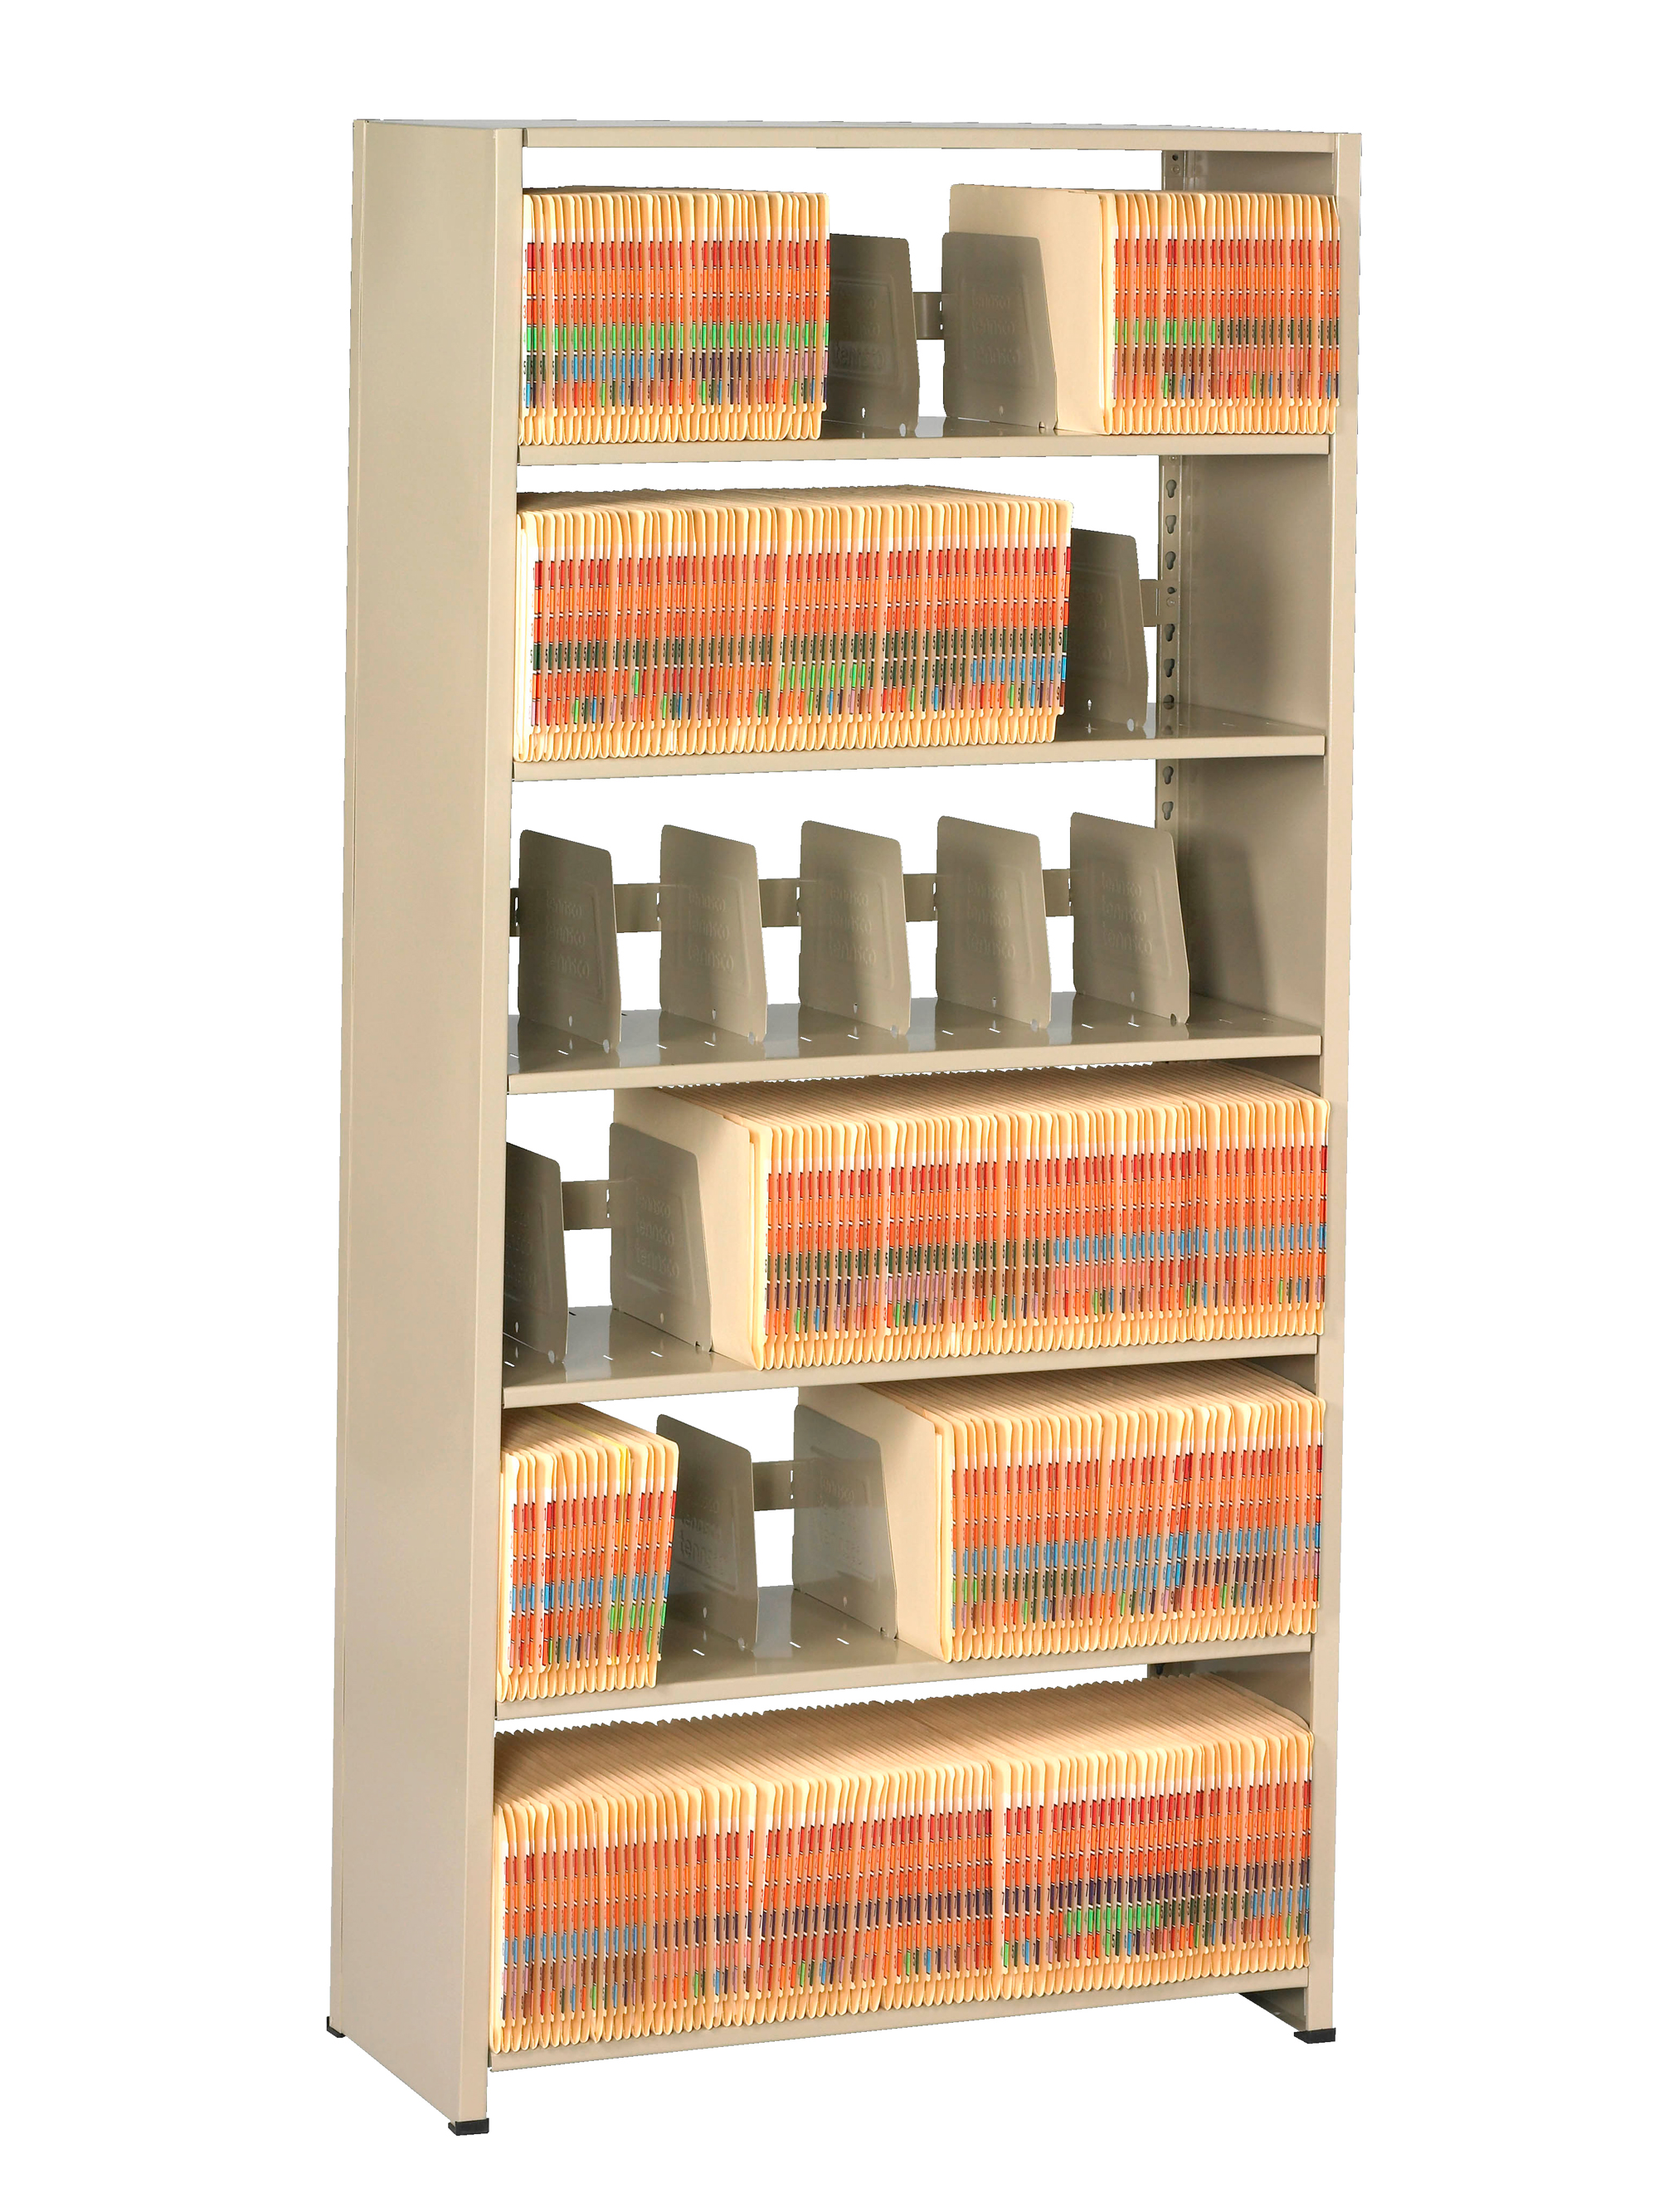 36 x 76 Imperial Shelving Single Entry